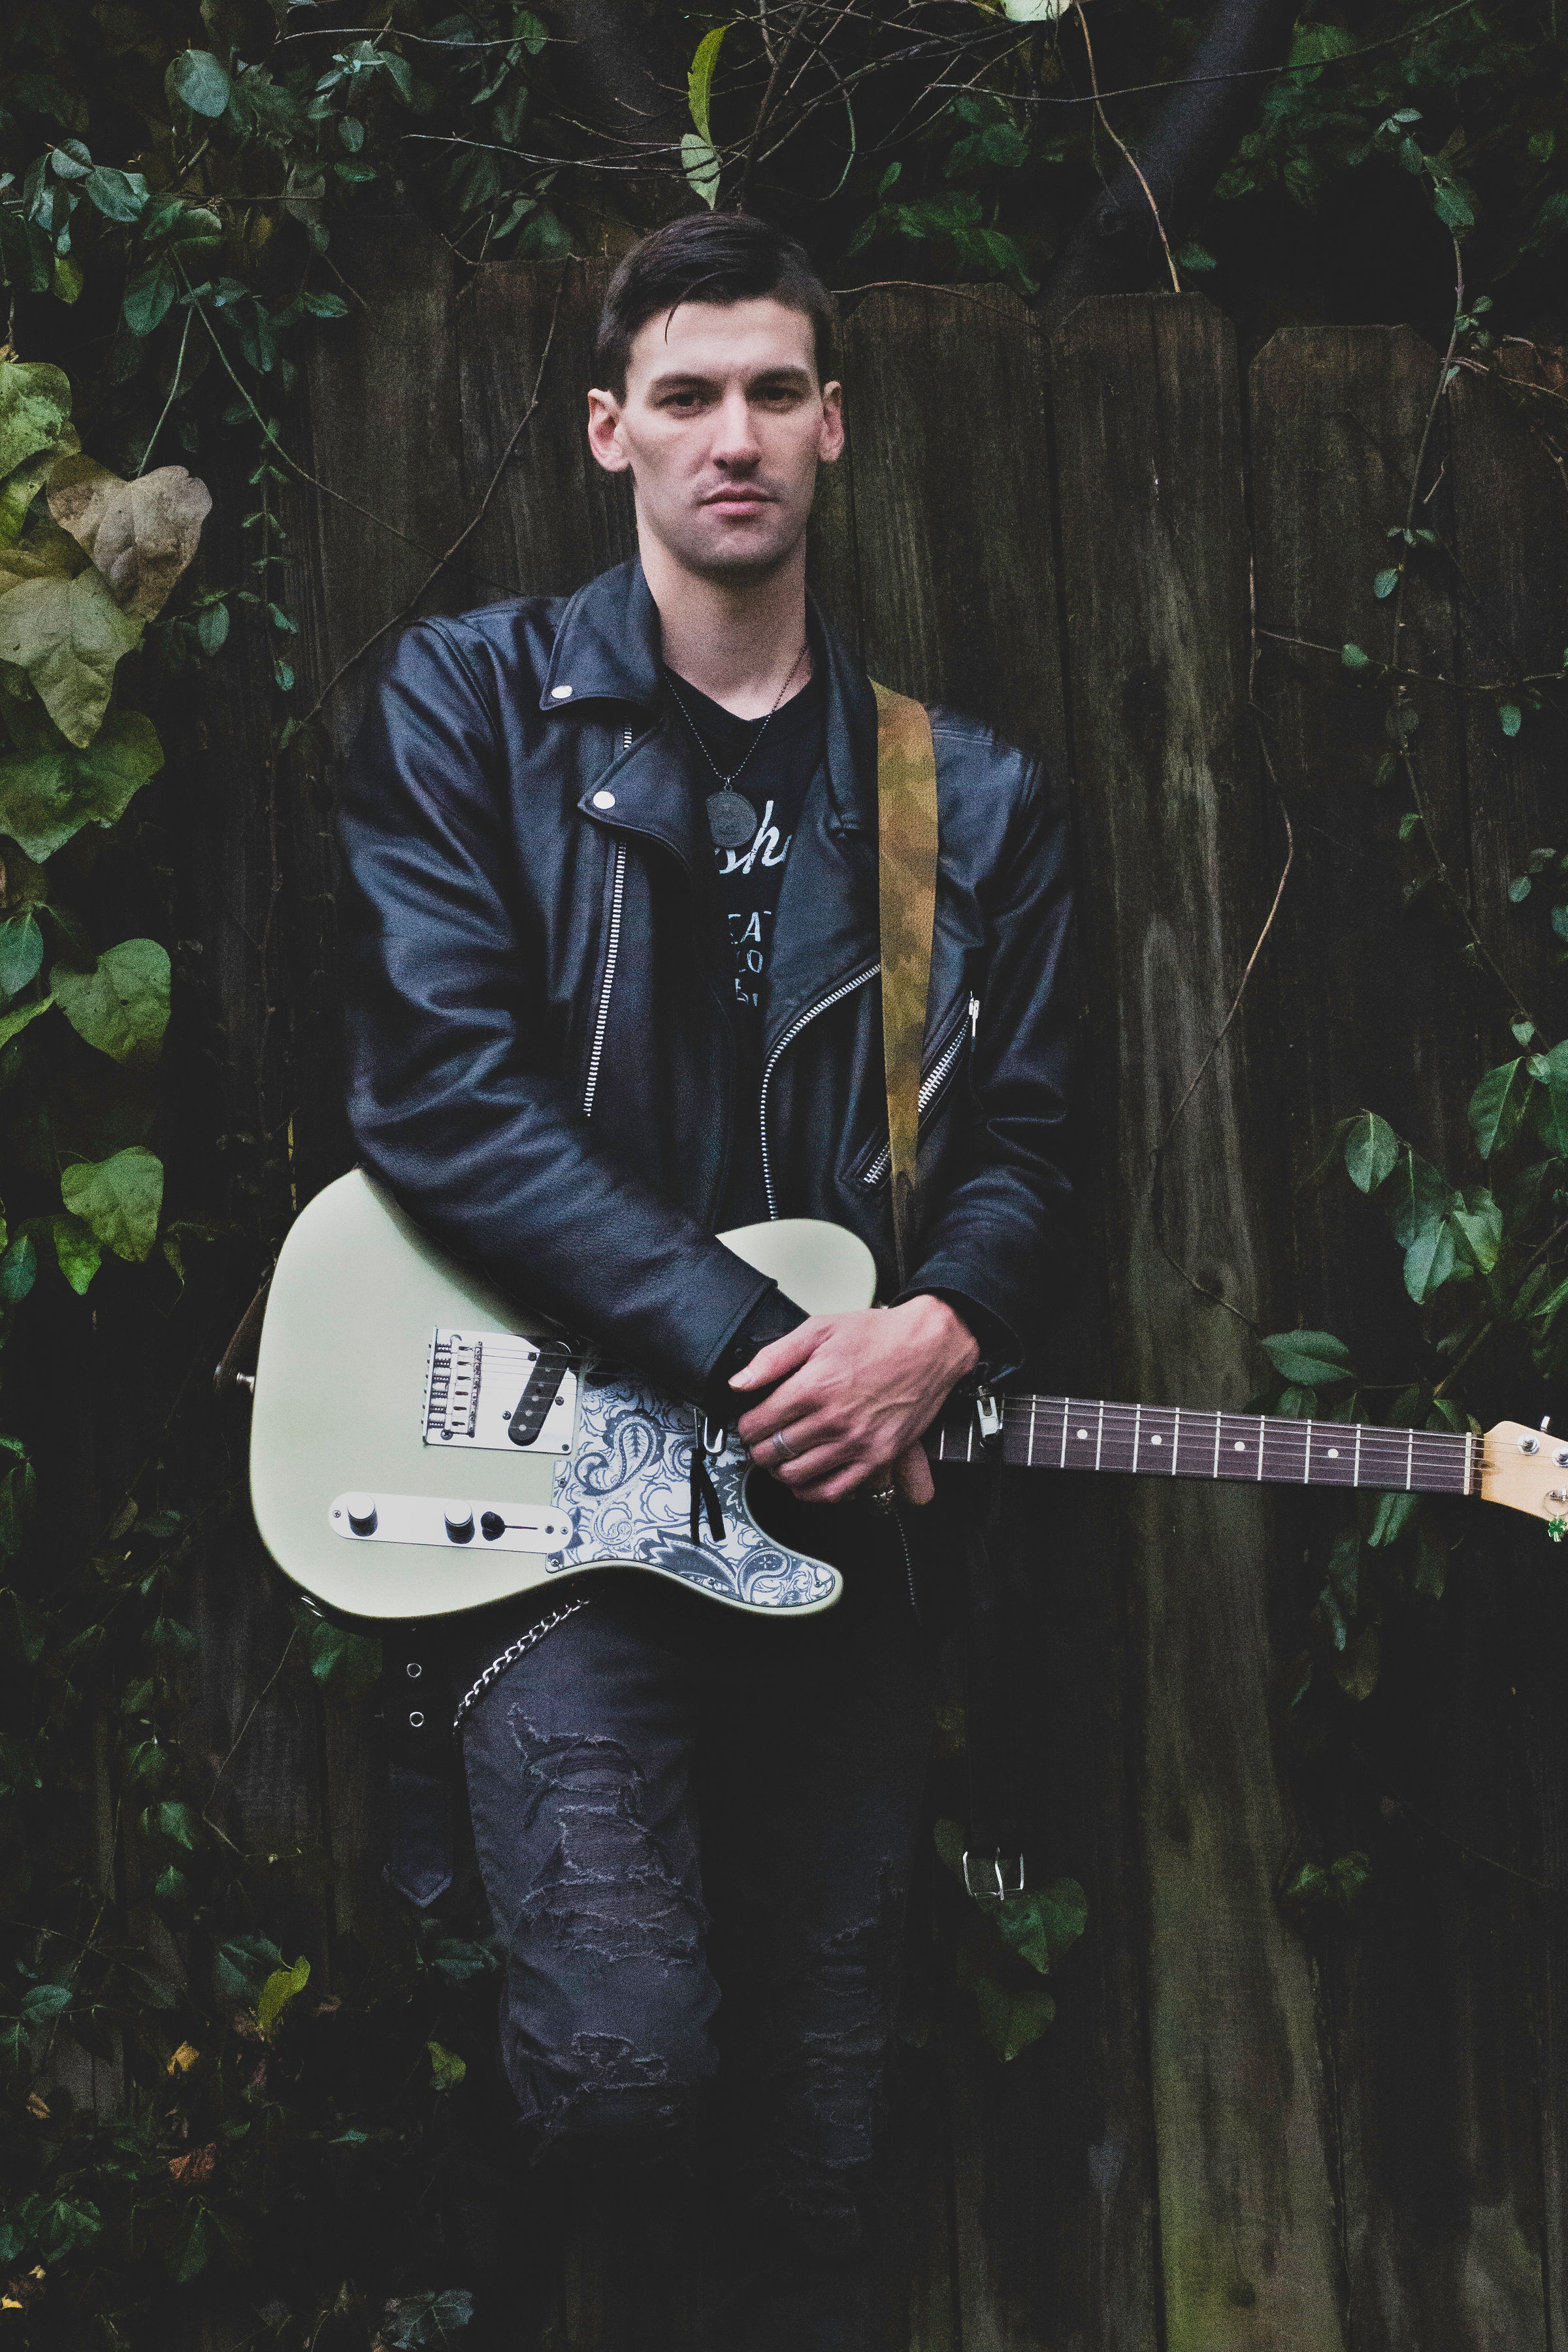 Dave Rudolph Fender Tele Telecaster Black Leather Jacket Ripped Jeans Rustic Brooding Intense Serious Musician Promo Picture Photo Guitar Sexy Man Guitarist Singer American Country Rock Outlaw